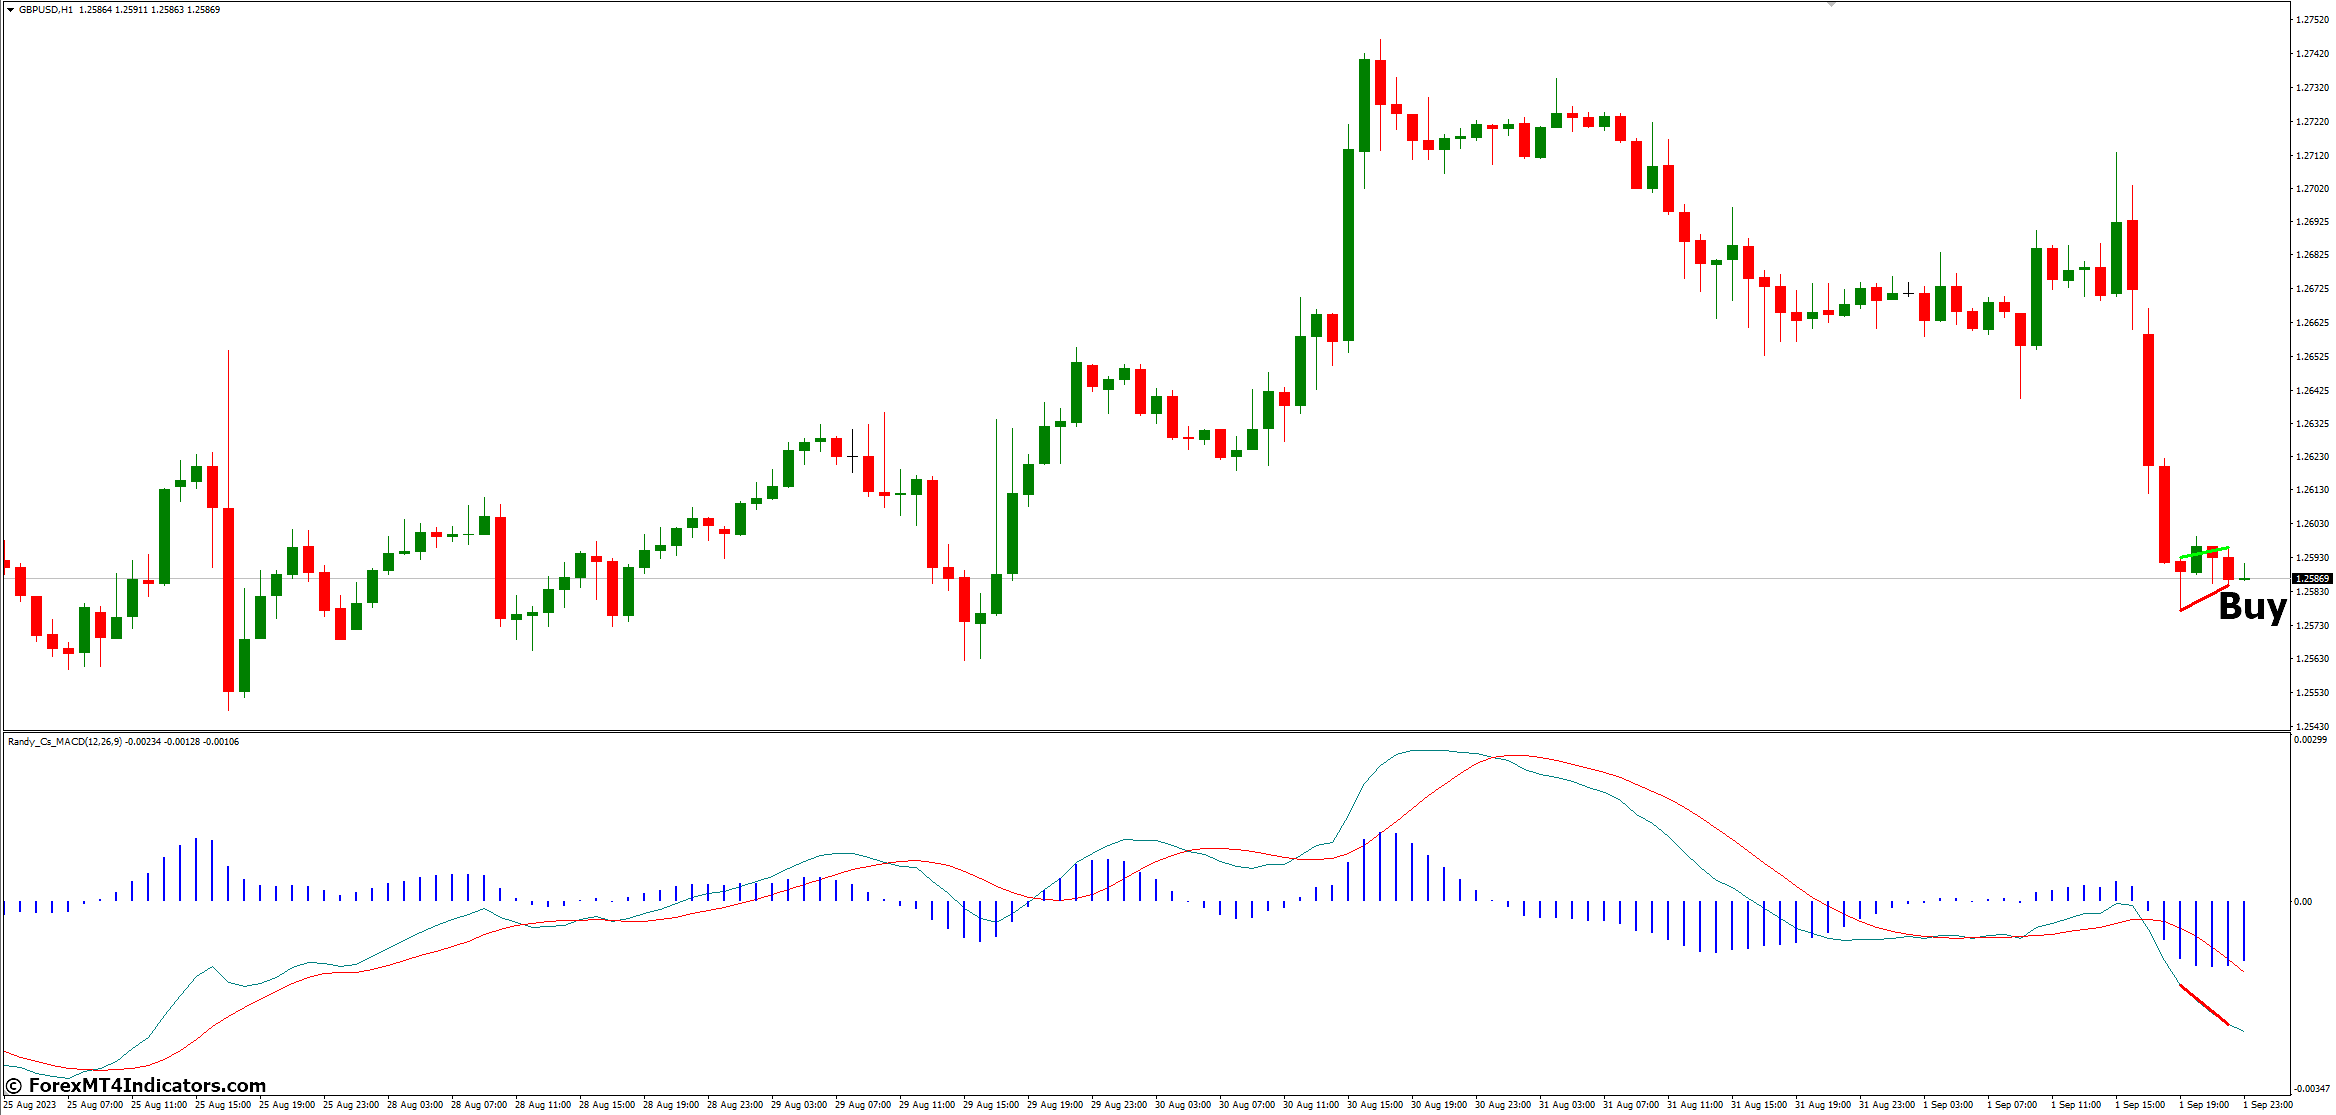 How to Trade with MACD Divergence MT4 Indicator - Buy Entry